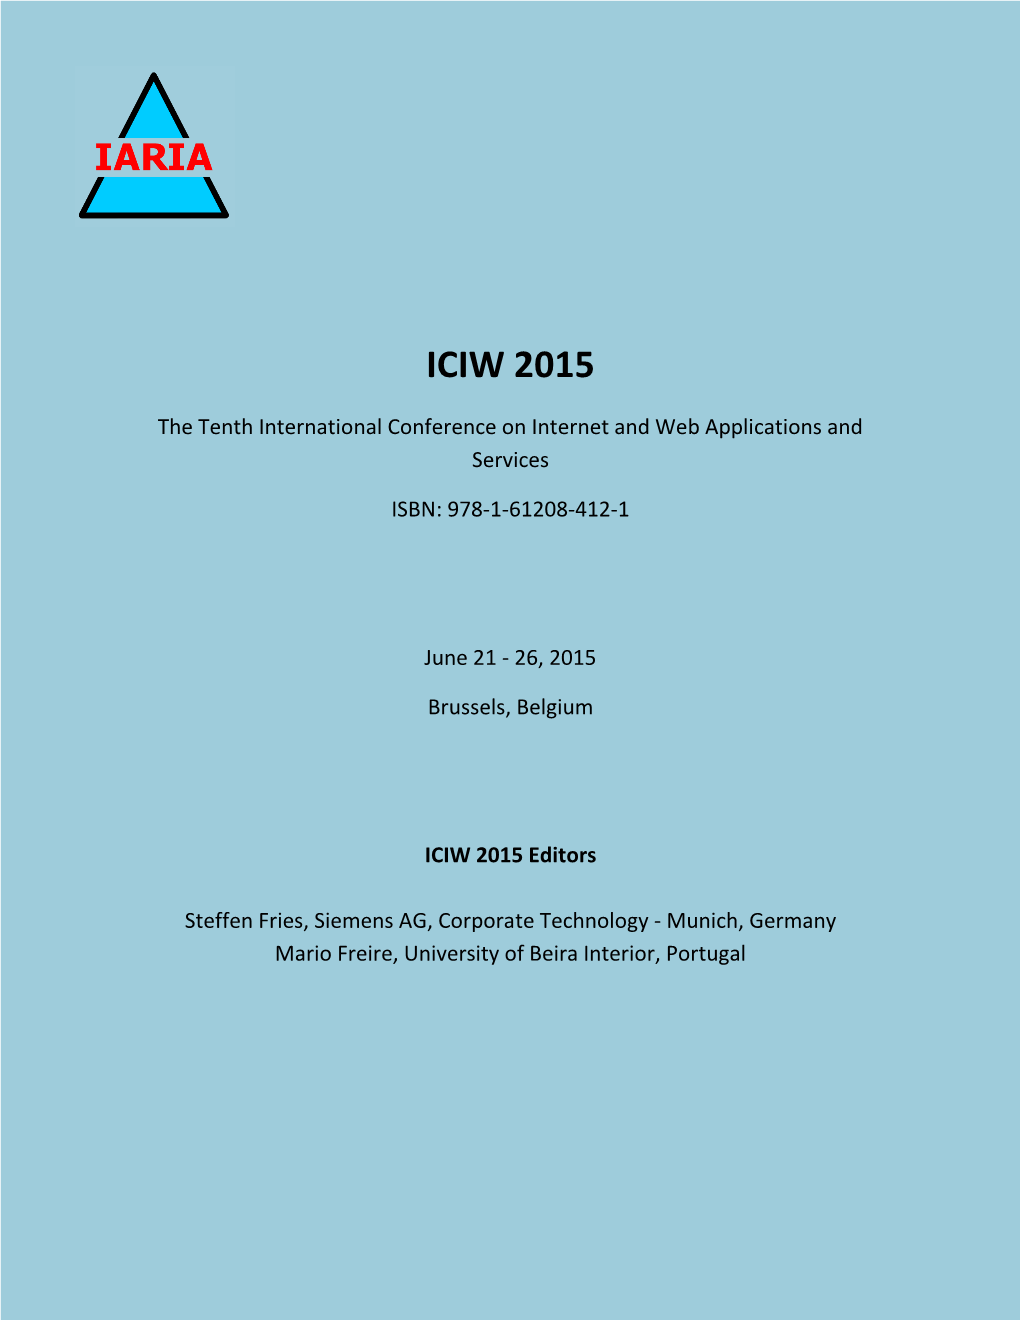 ICIW 2015, the Tenth International Conference on Internet